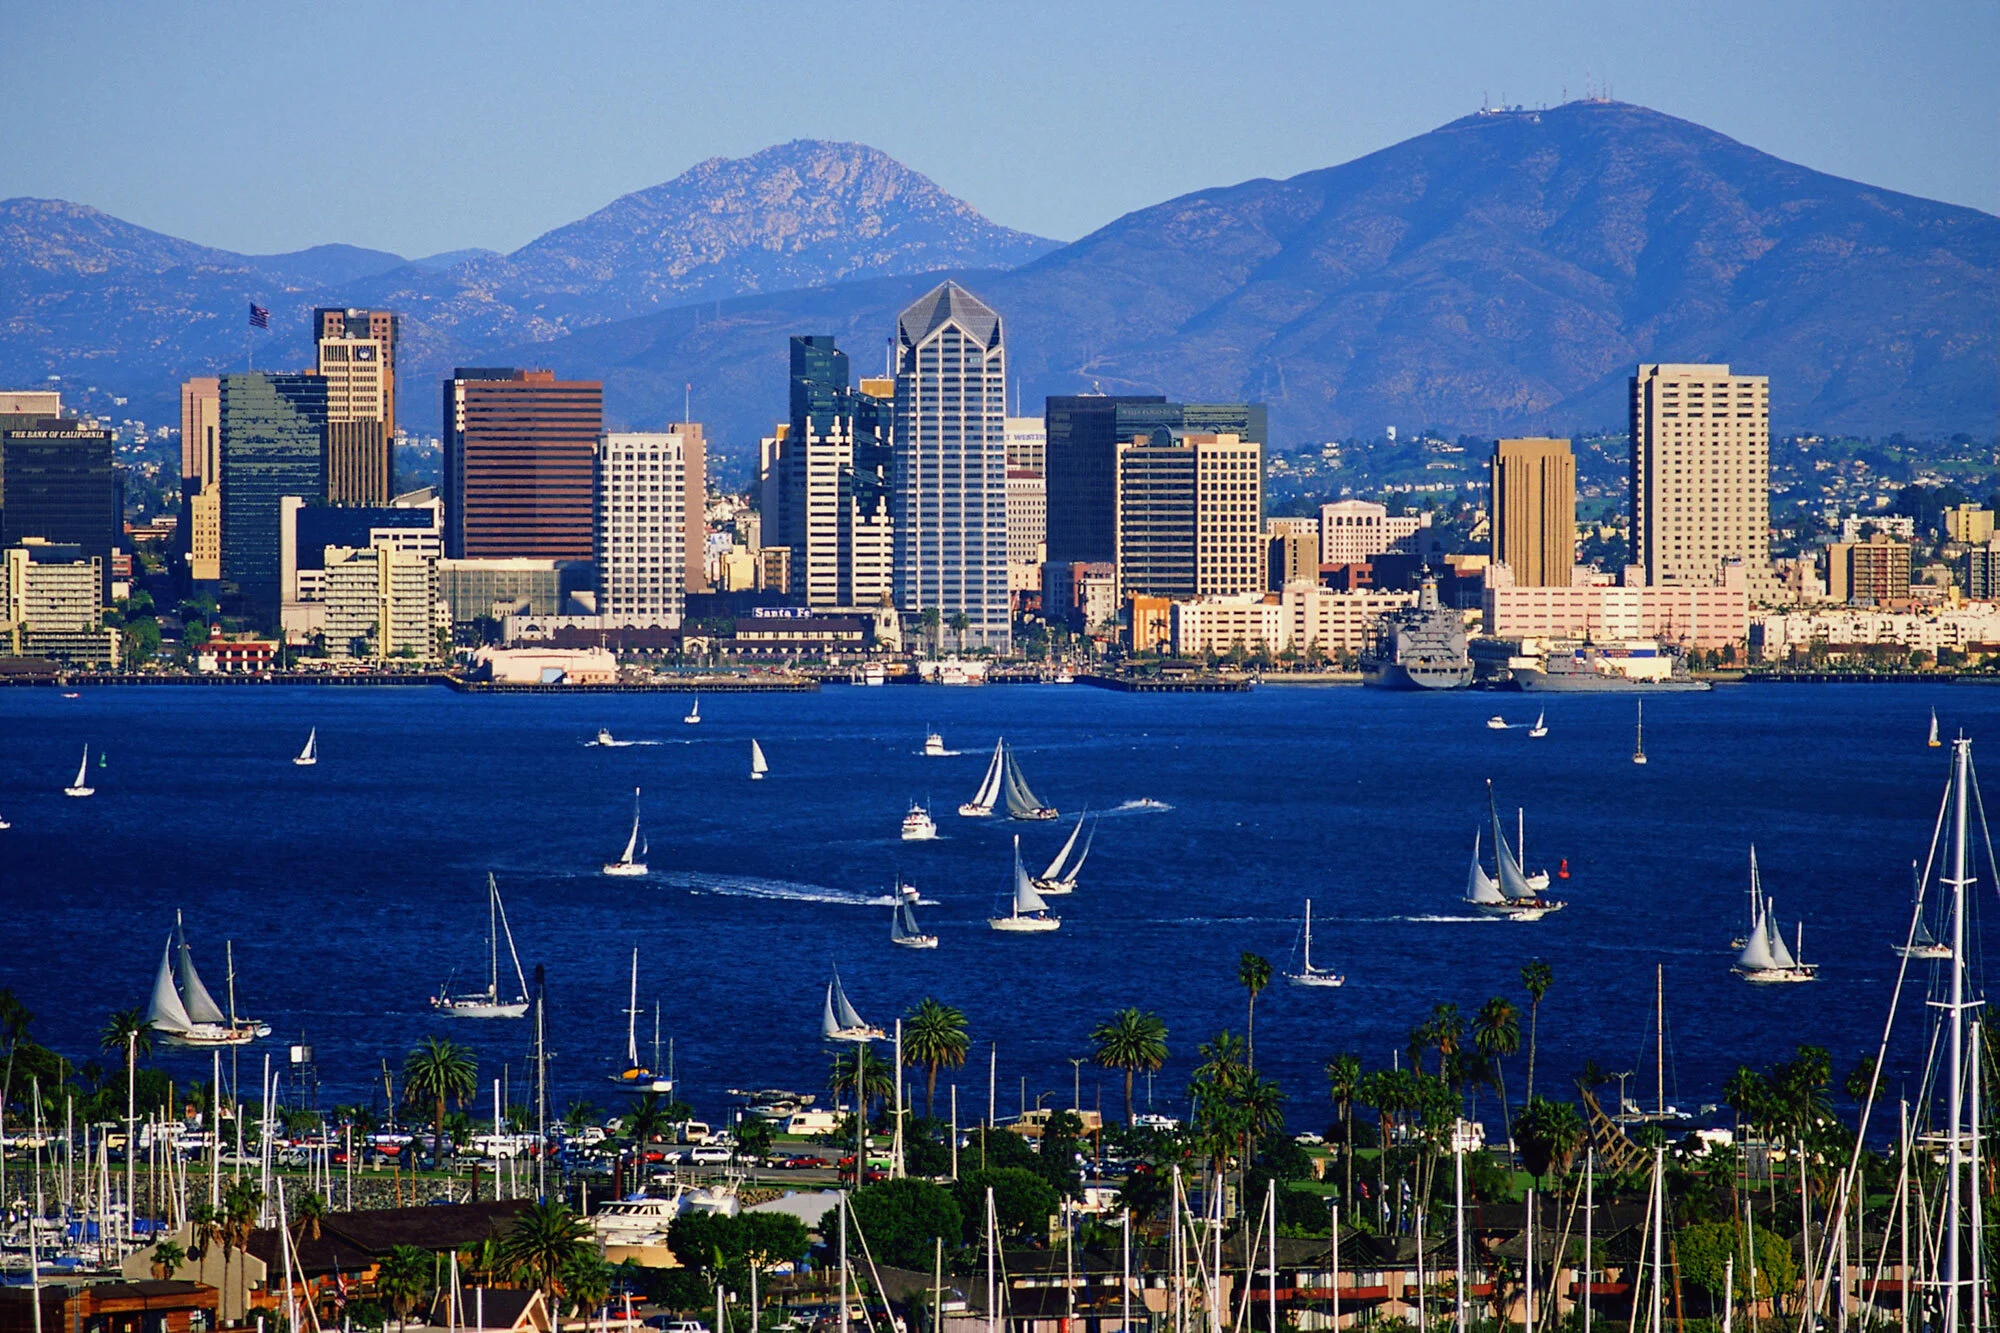 A view of several boats off the coast in San Diego with the skyline and mountains in the background